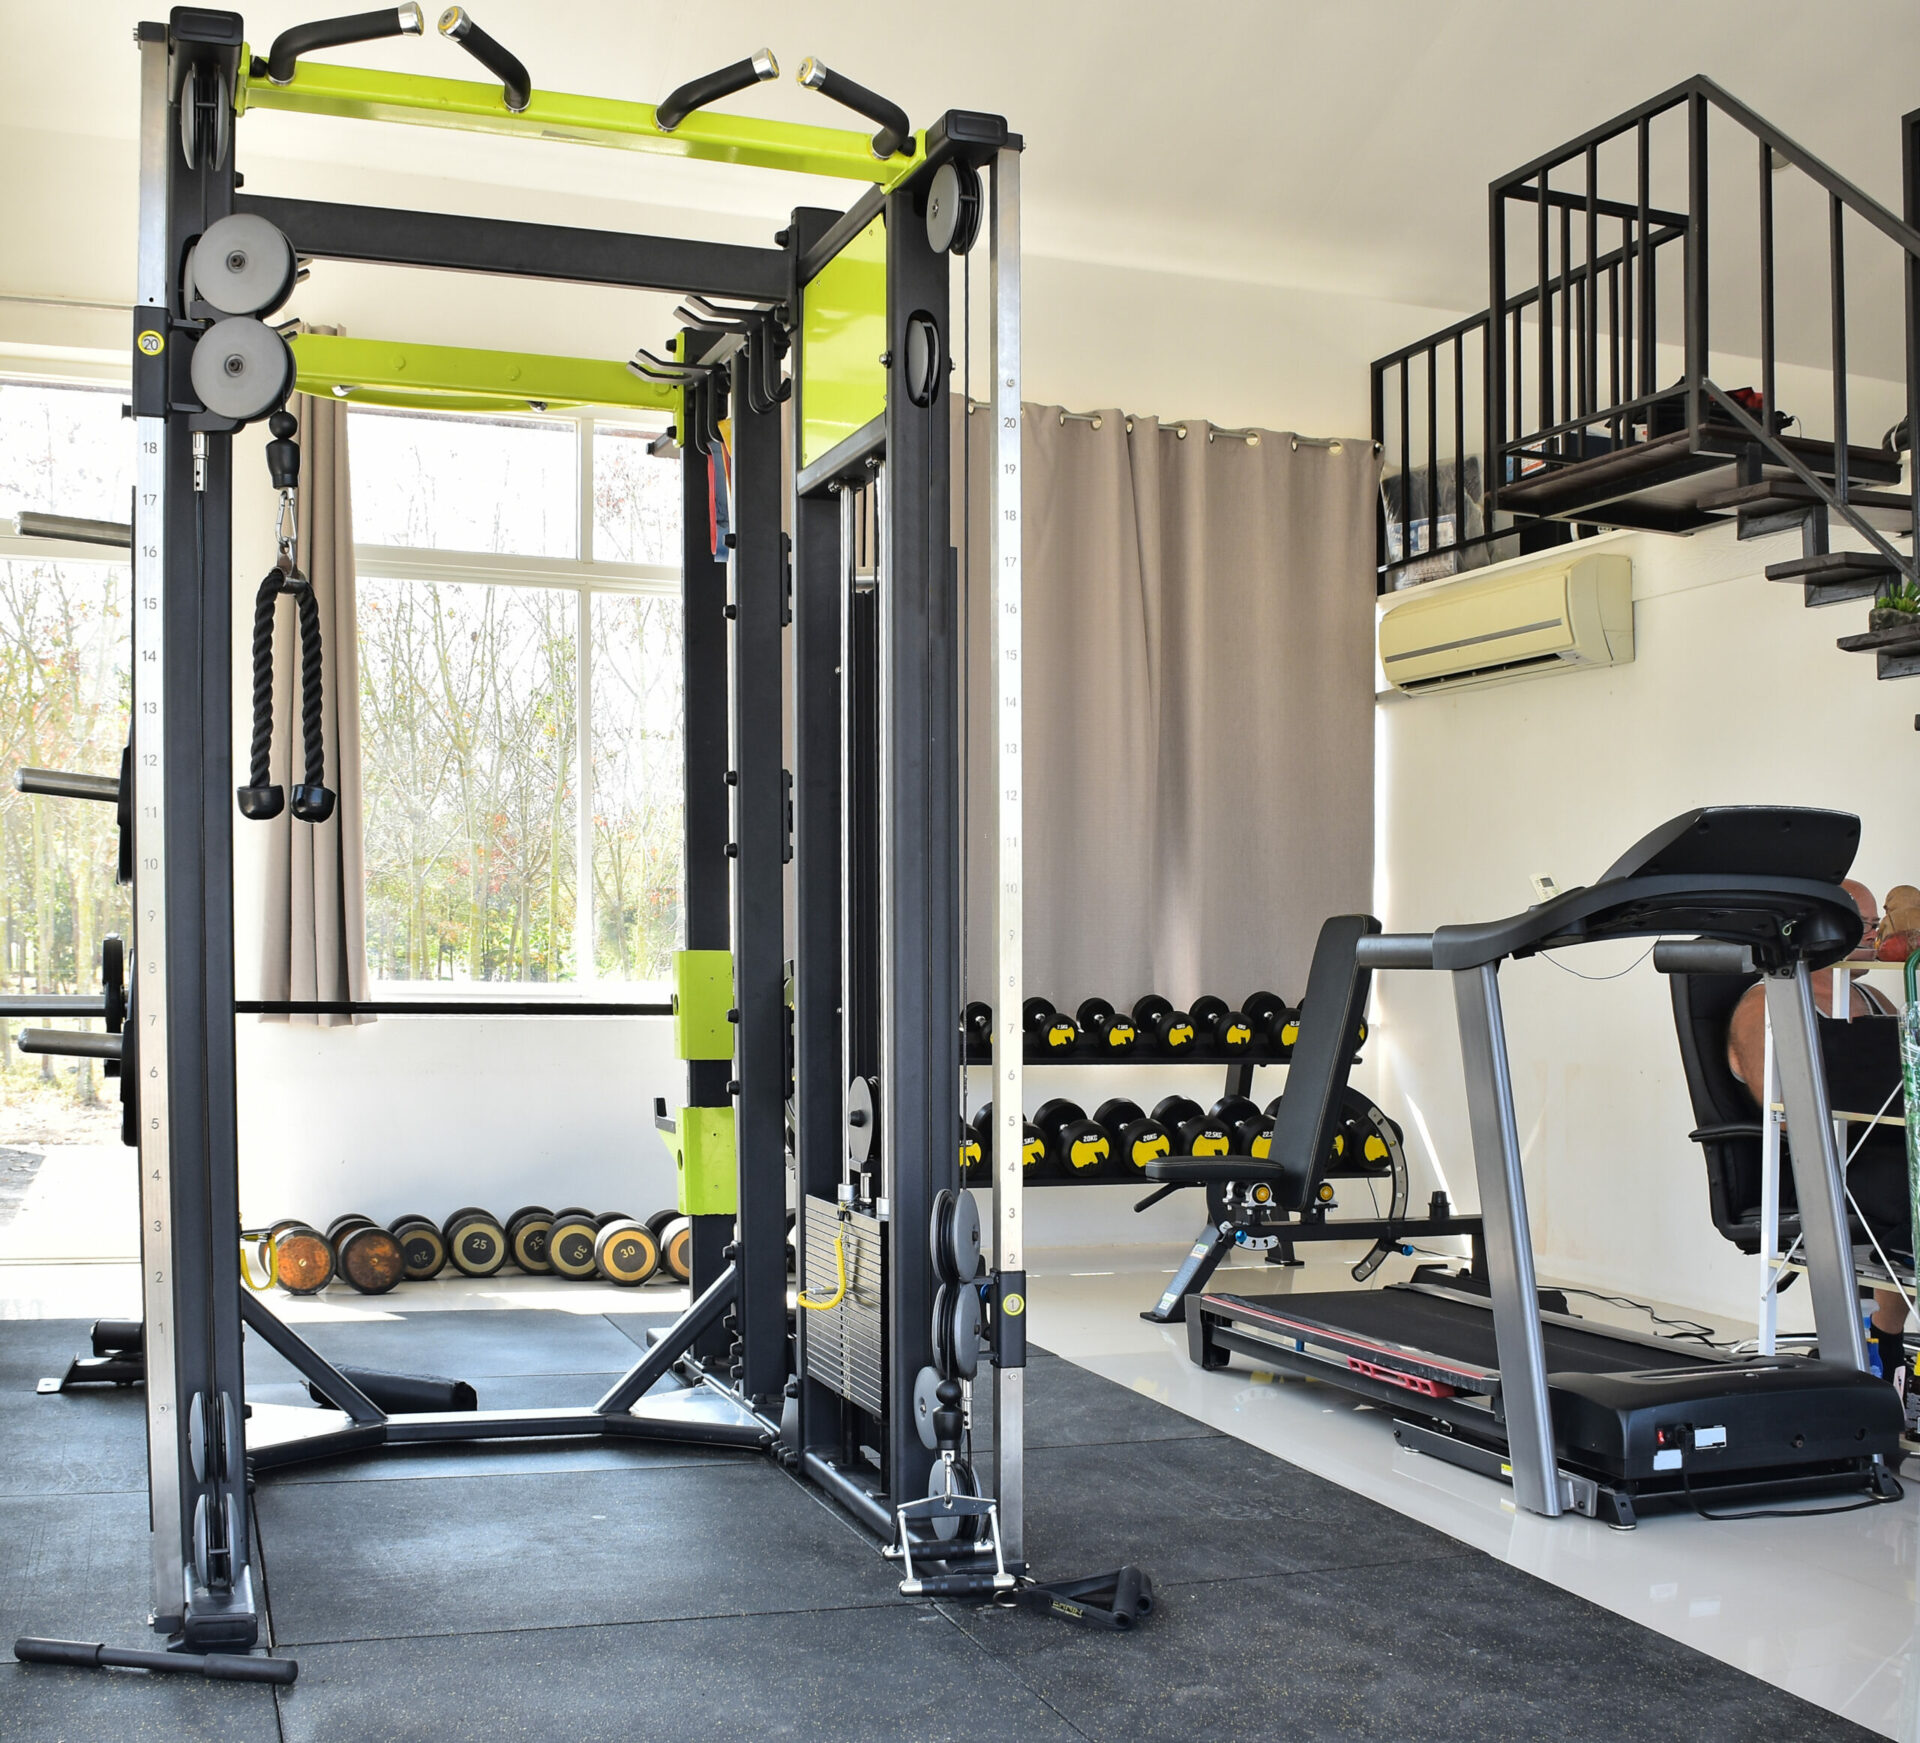 Squat bar, dumbbells and treadmill in home gym.